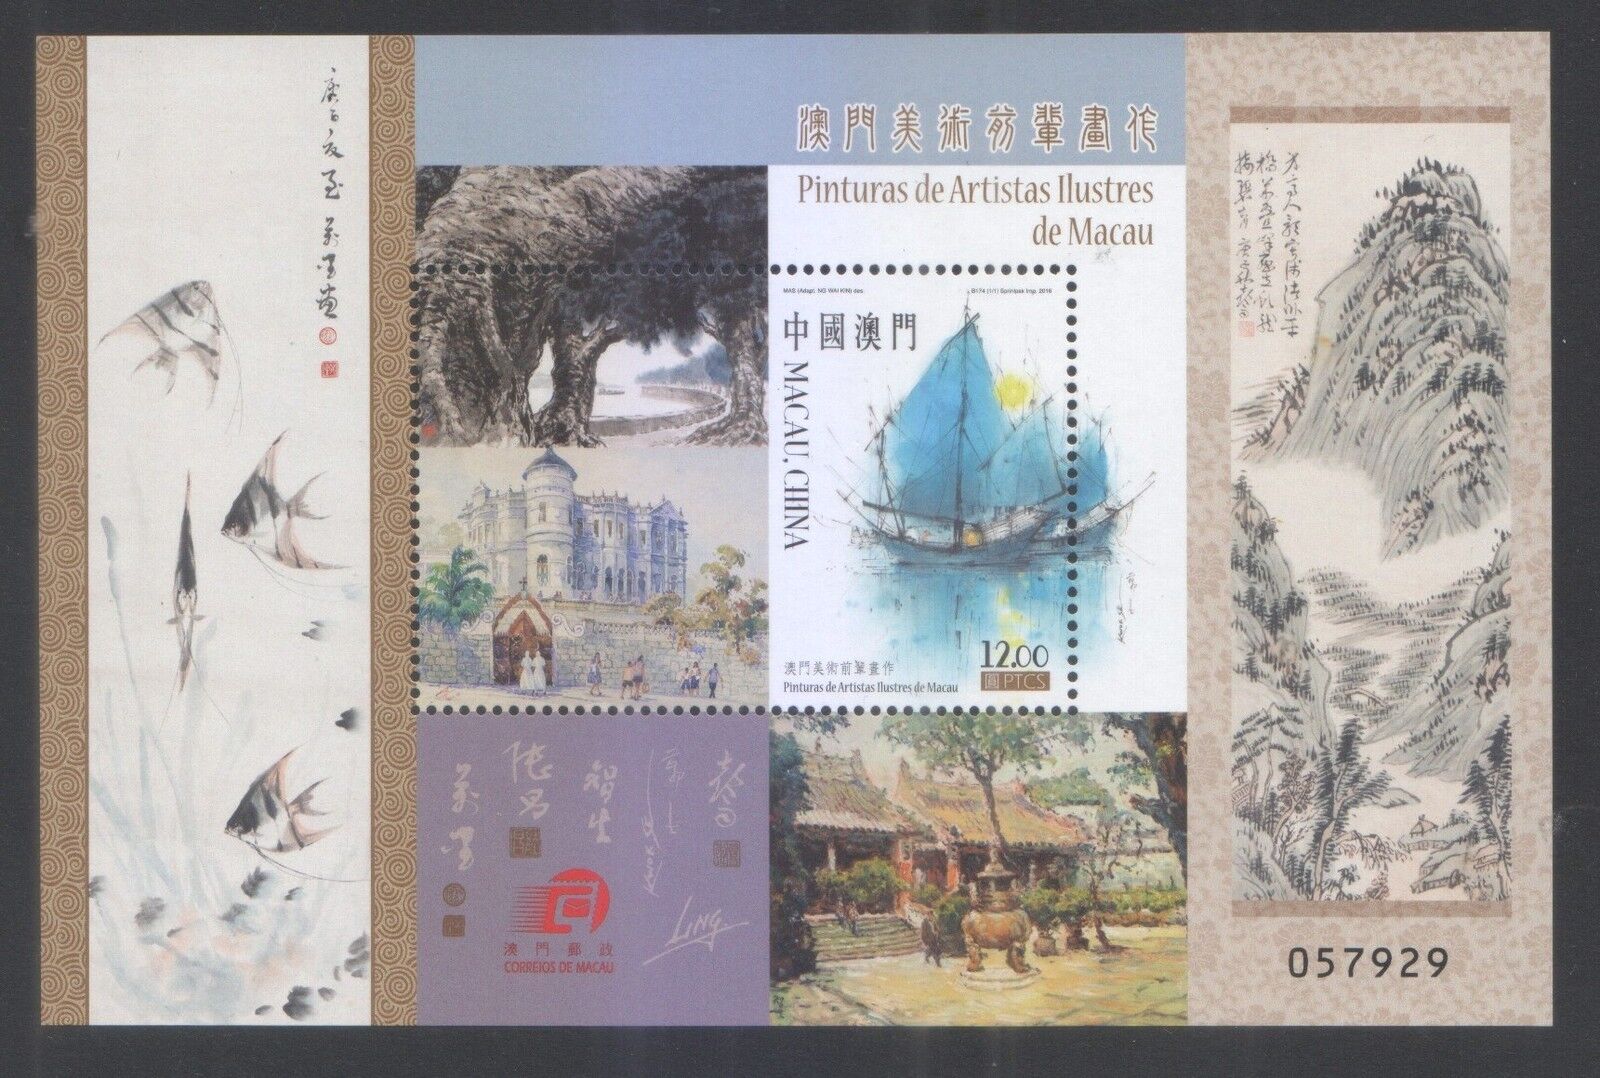 MACAU CHINA 2016 PAINTINGS OF MACAO\'S FAMOUS ARTISTS SOUVENIR SHEET 1 STAMP MINT